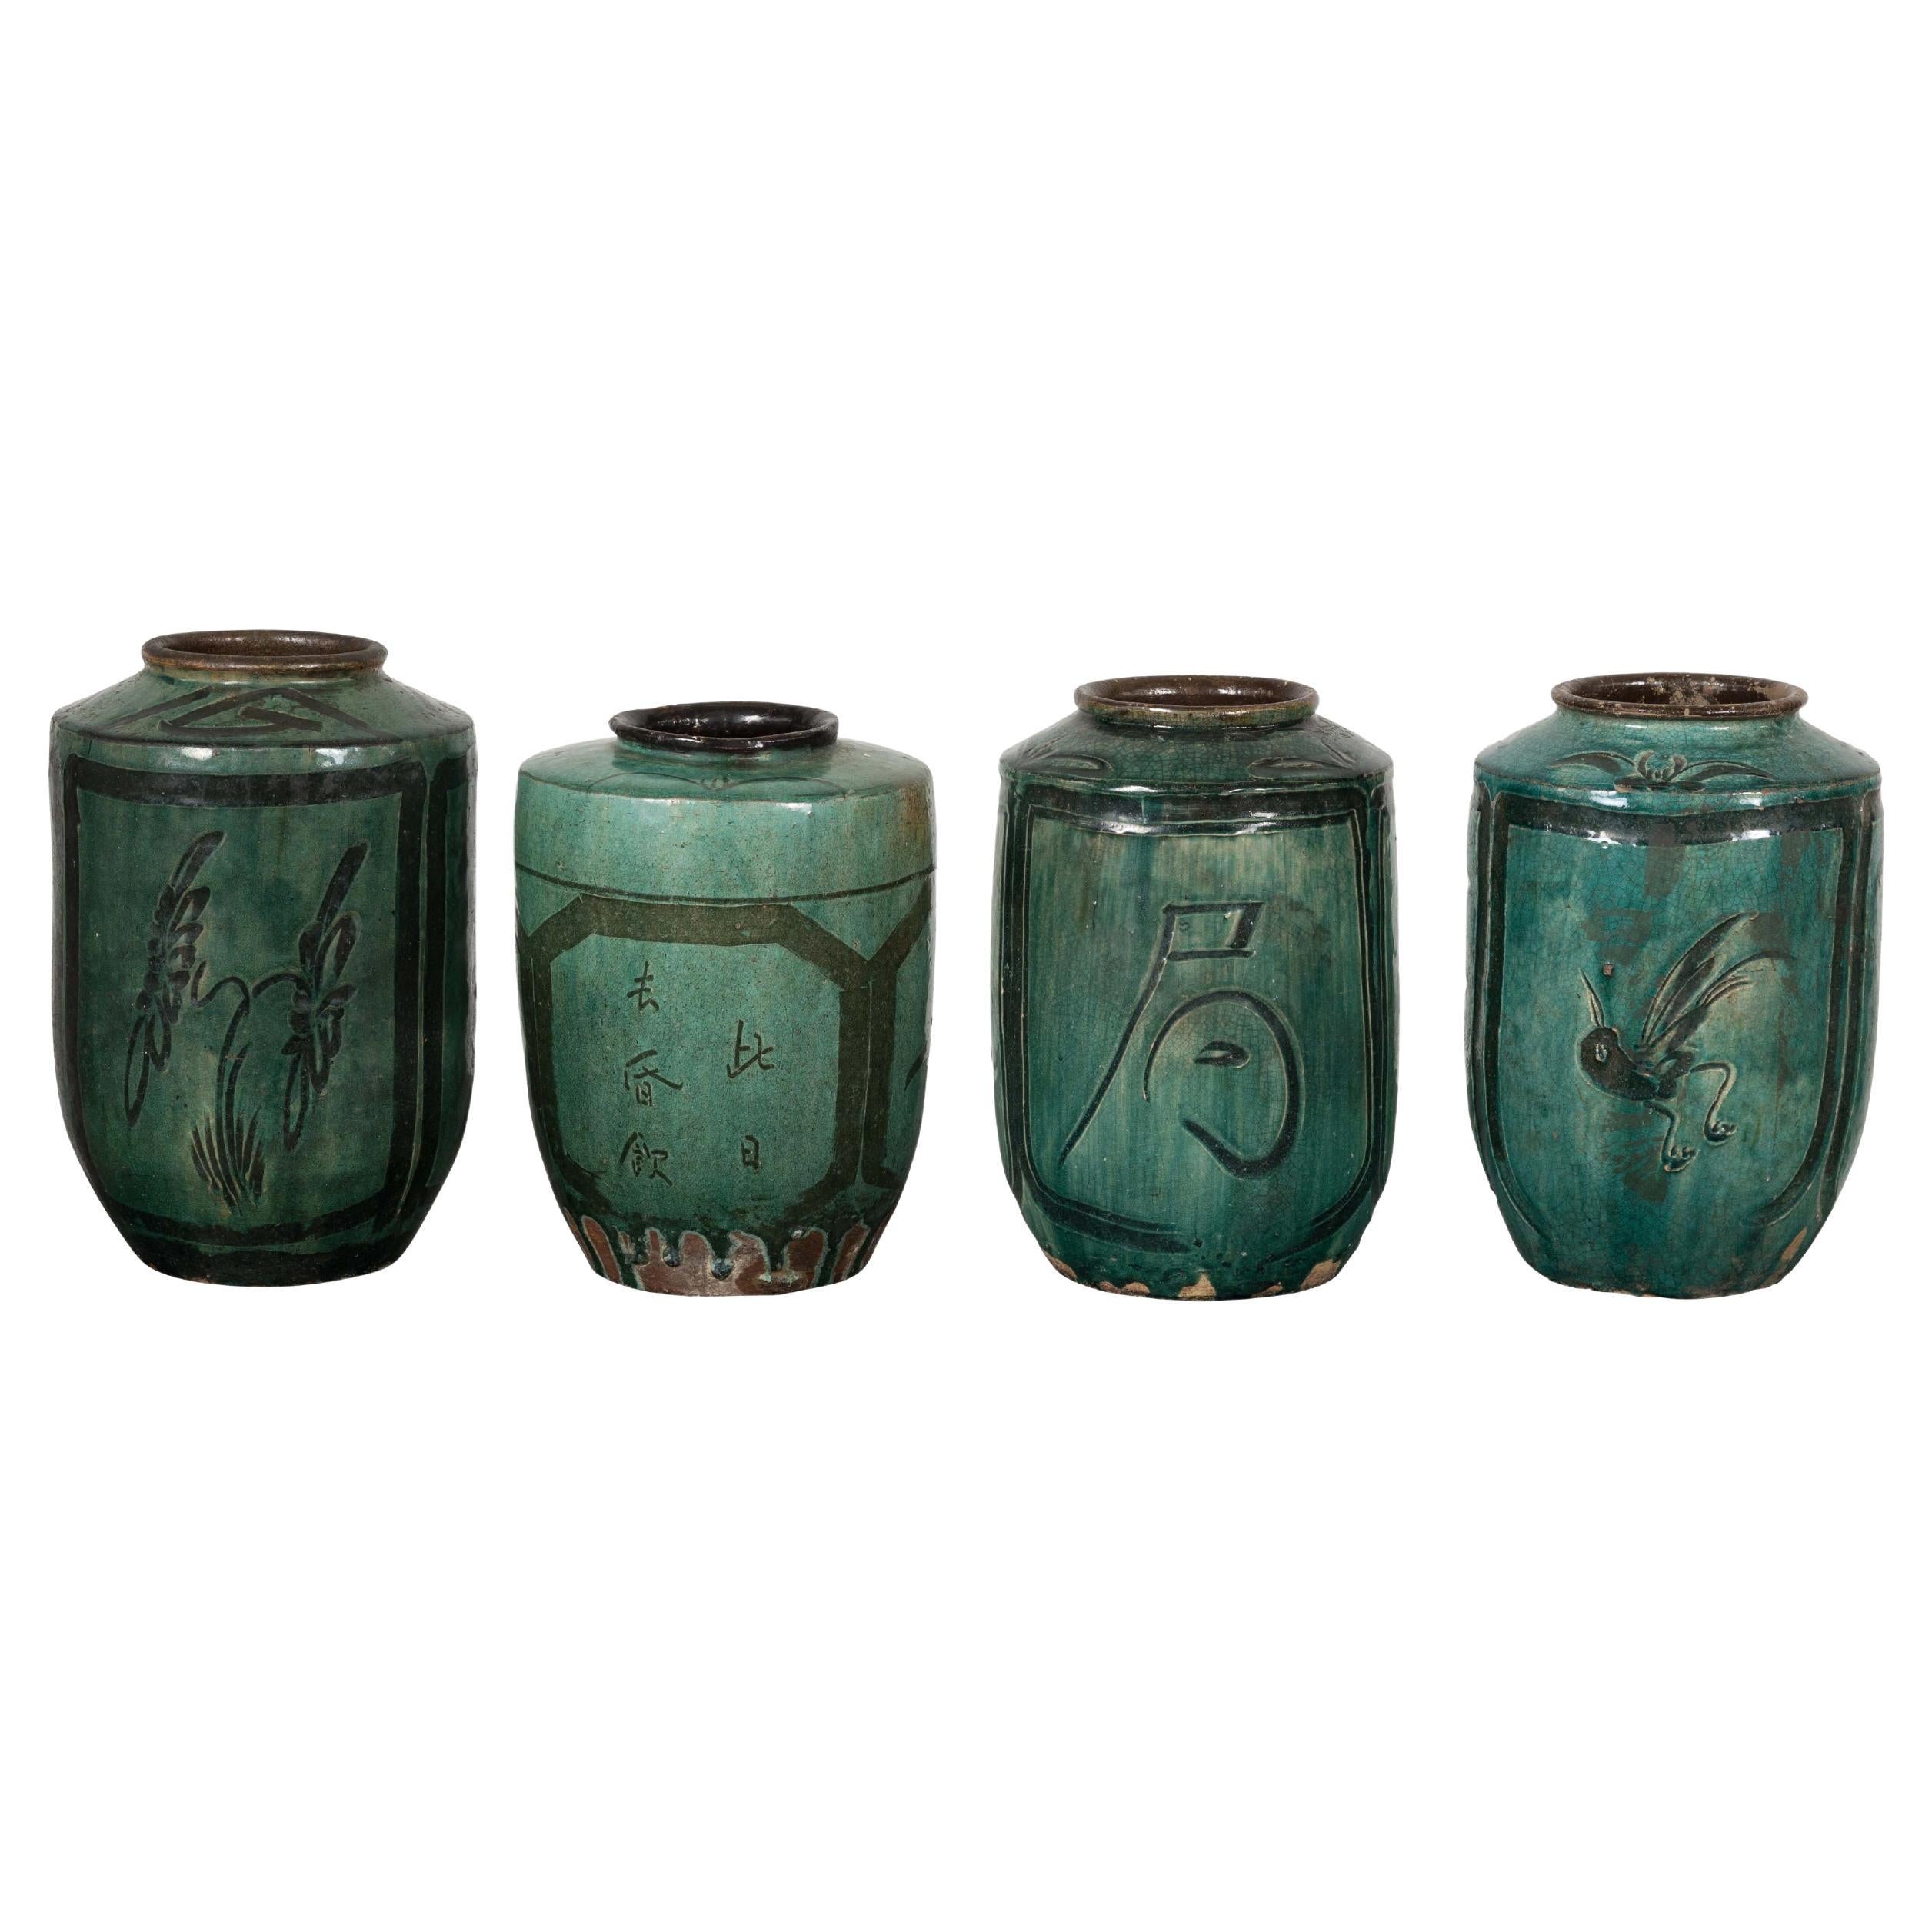 Four Green Antique Ceramic Jars, Sold Each For Sale